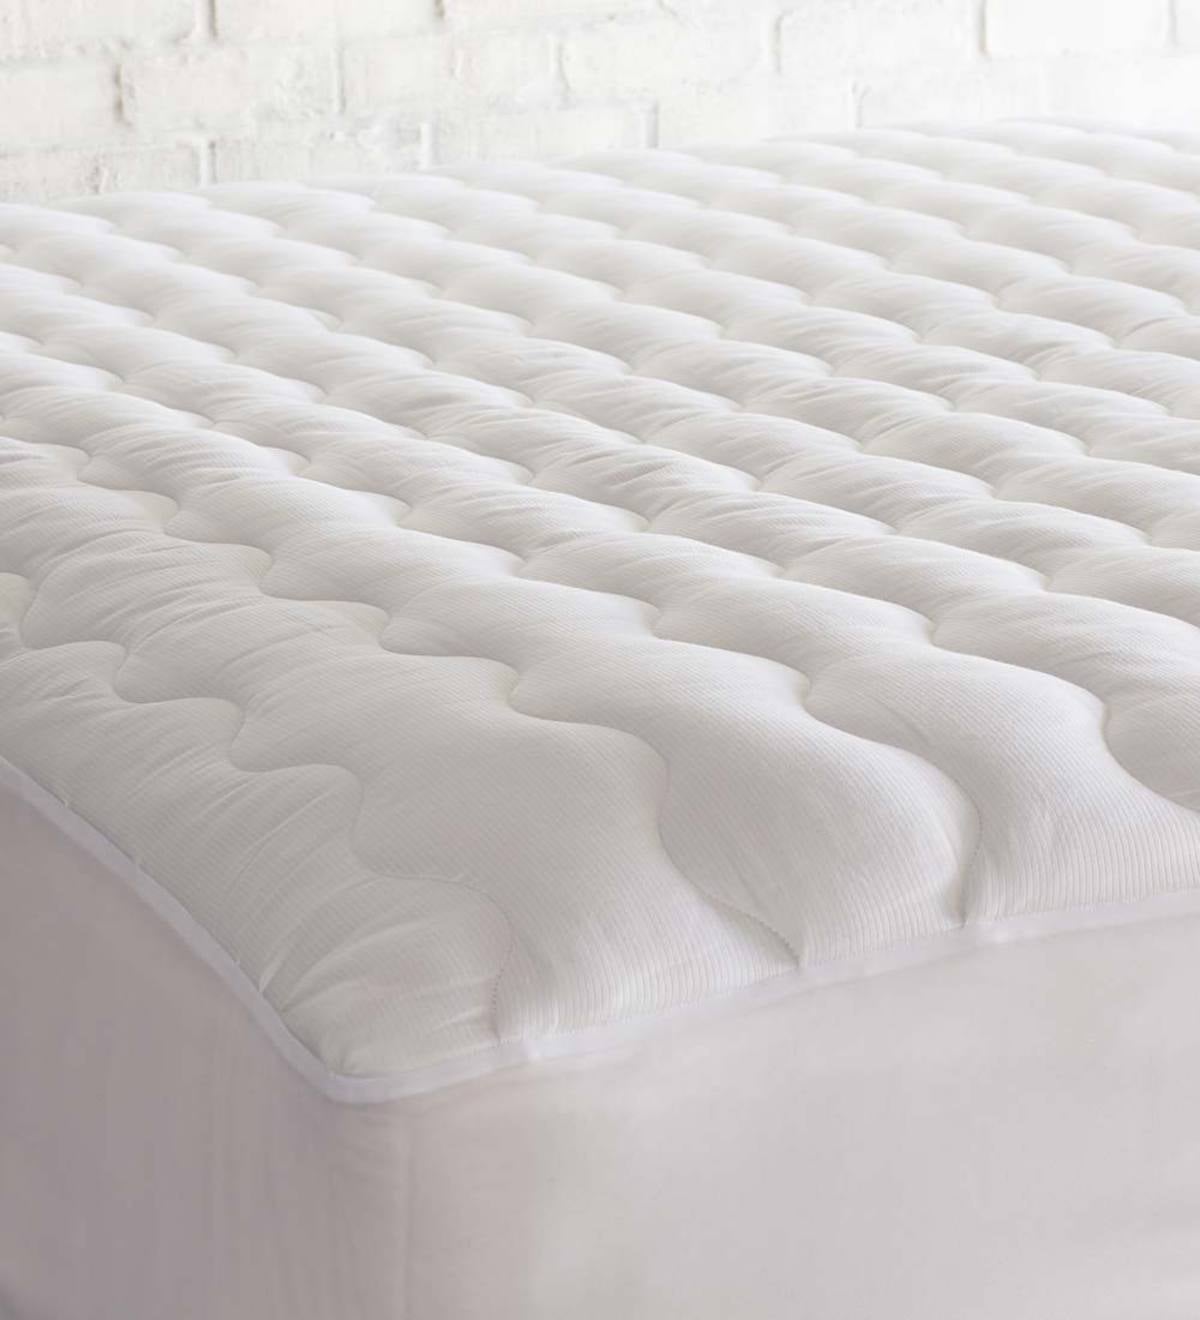 Dreambest Hypoallergenic Cotton Mattress Protector, Full Size - Plow & Hearth